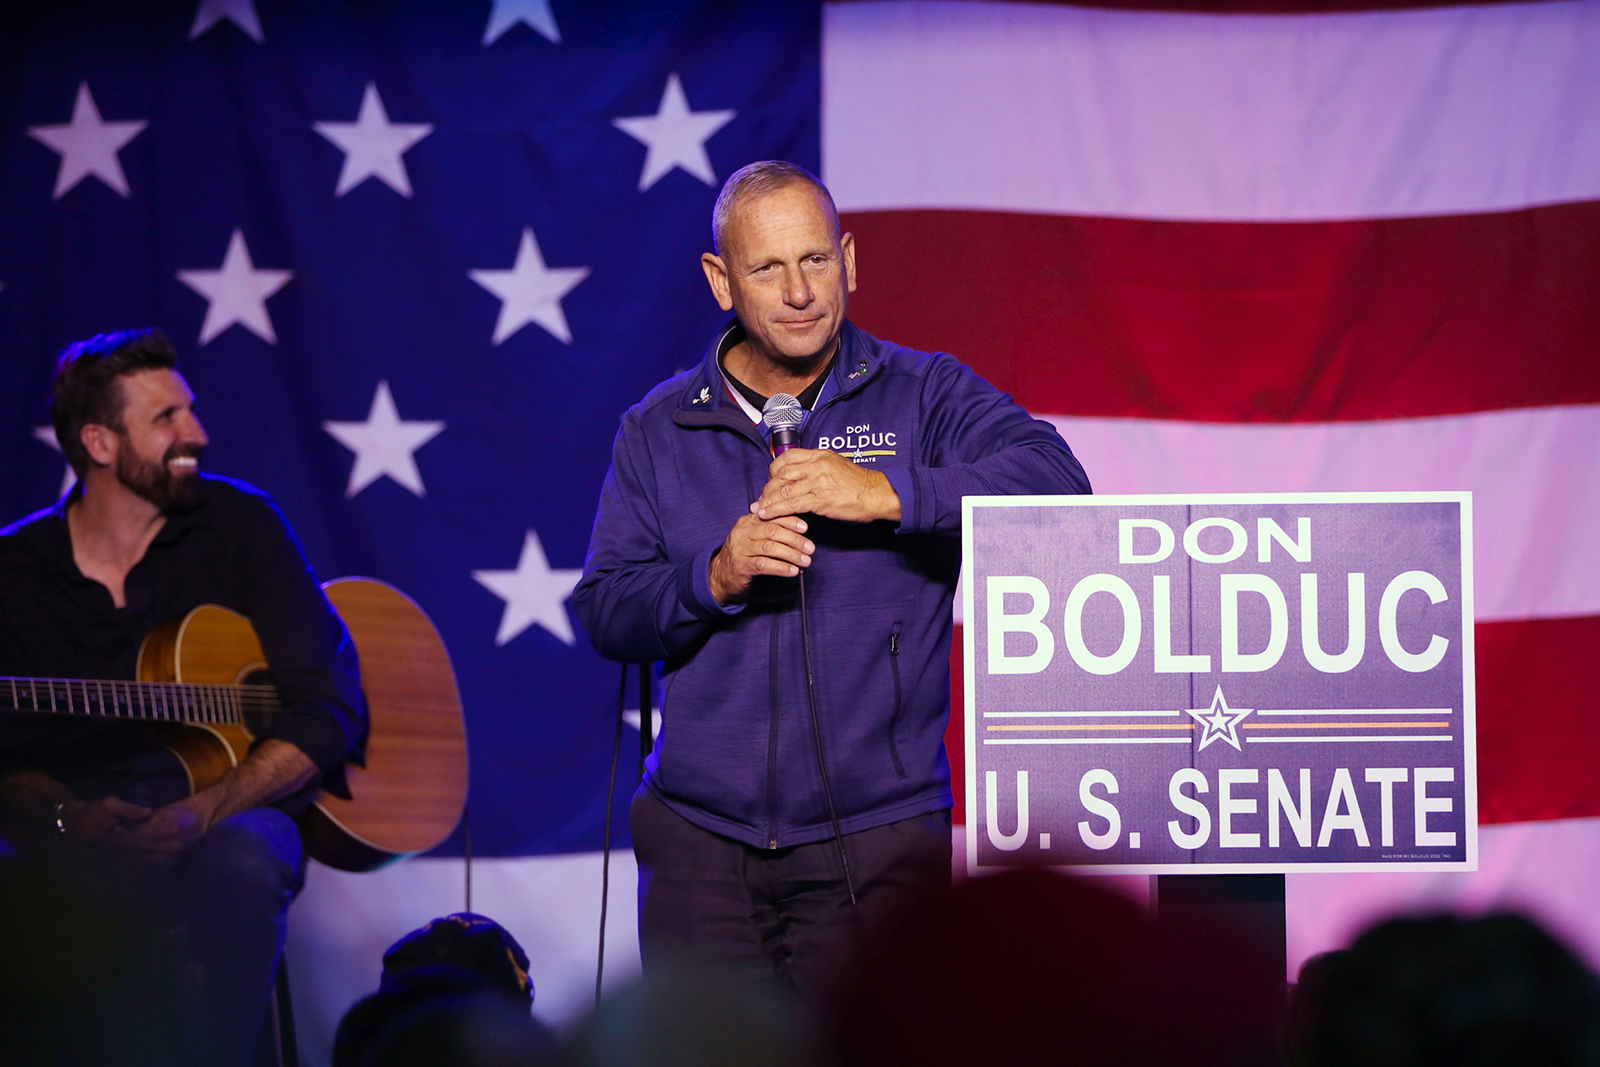 Don Bolduc greets the crowd before results are announced, in Manchester, New Hampshire, on November 8.